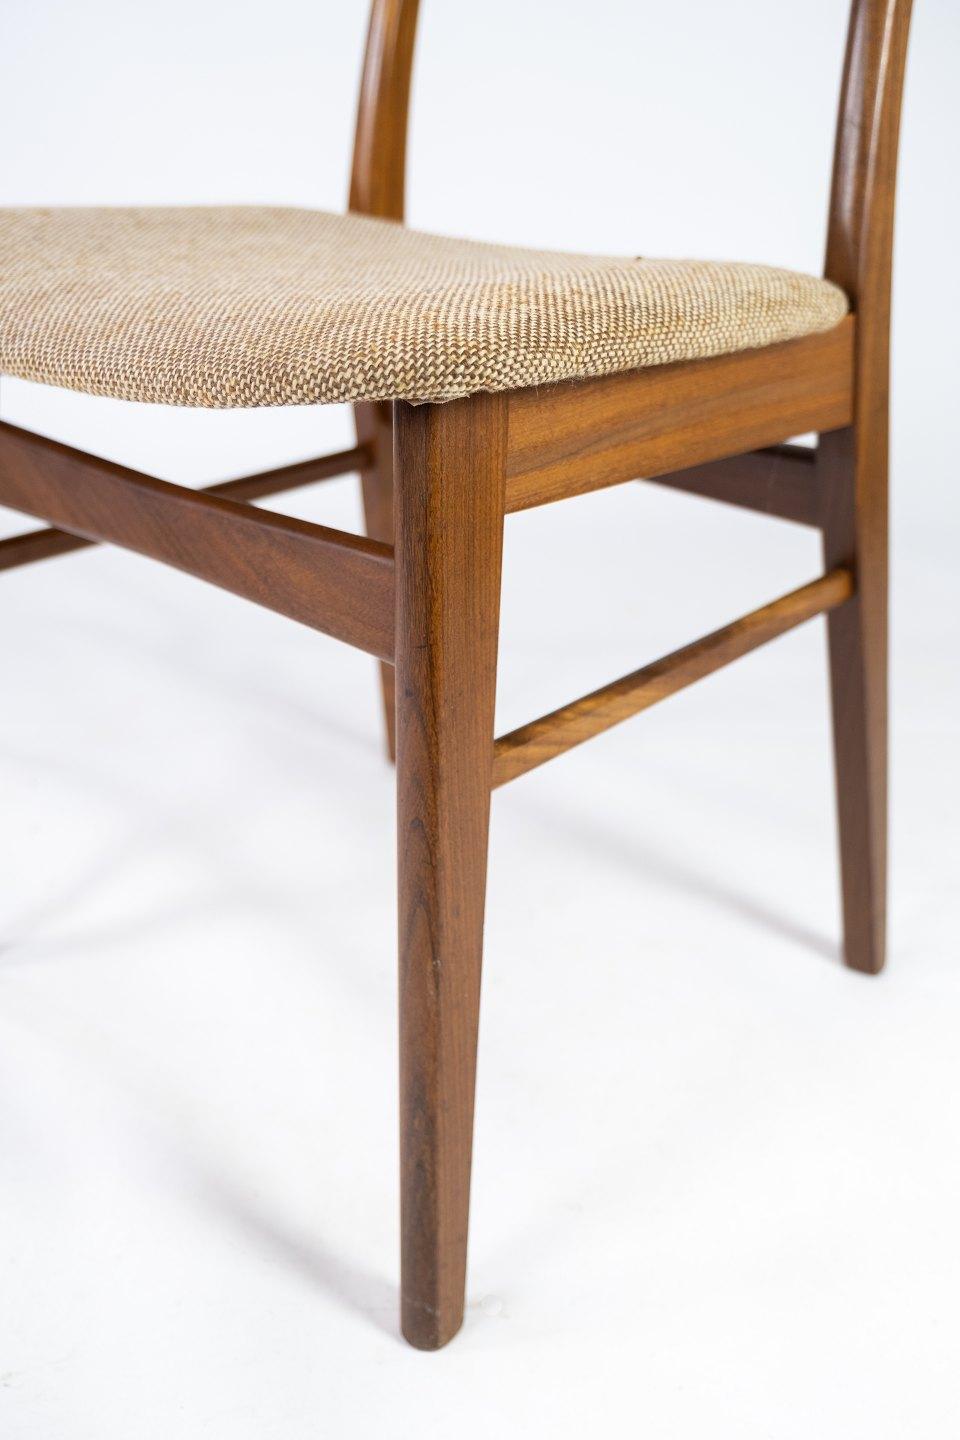 Mid-20th Century Dining Room Chair in Teak and Light Fabric of Danish Design from the 1960s For Sale